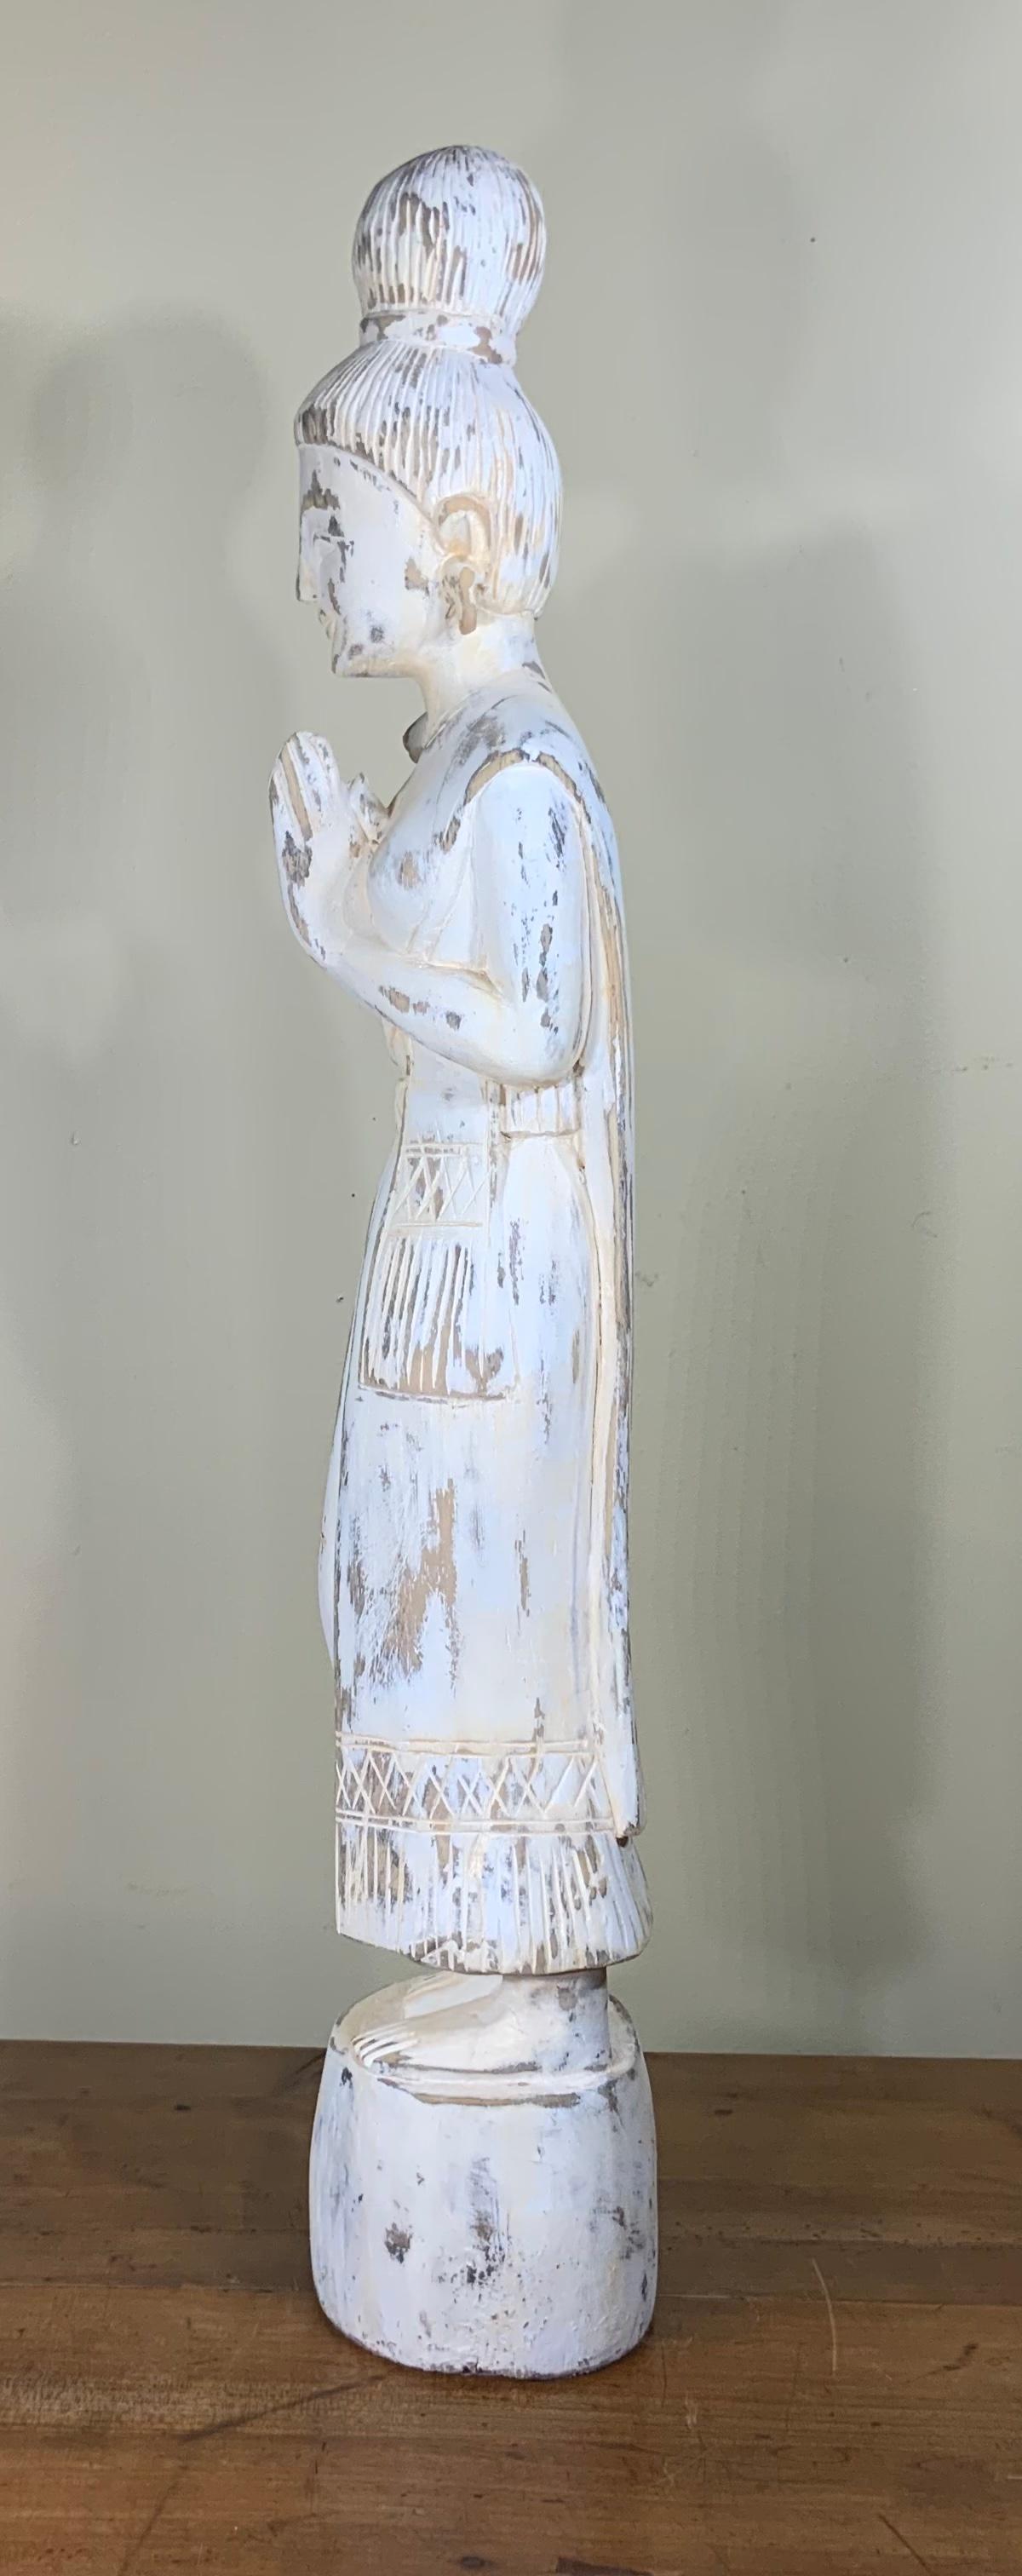 Elegant Quan Yen statue made of hand carved wood, white color finish, beautiful facial expiration, hands forward in grace and goodwill. Exceptional looking dress vivid carving make this beautiful statue a one of a kind object of art to display.
 